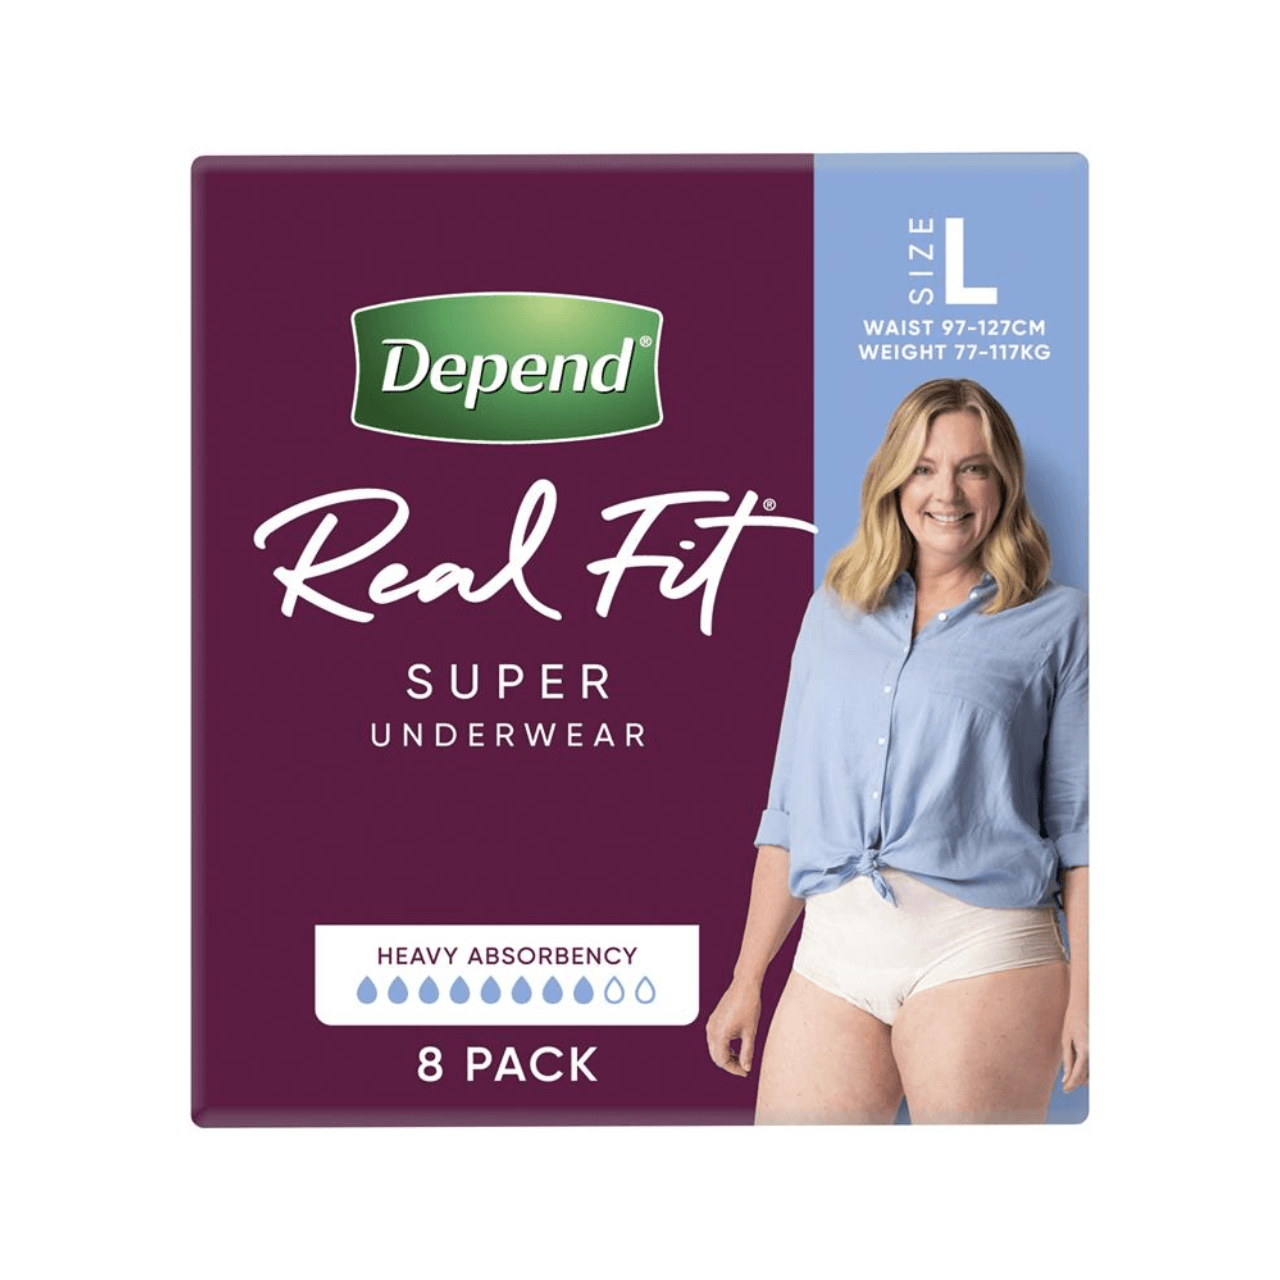 Depend Real Fit Women's Night Defence Underwear 8 Pack